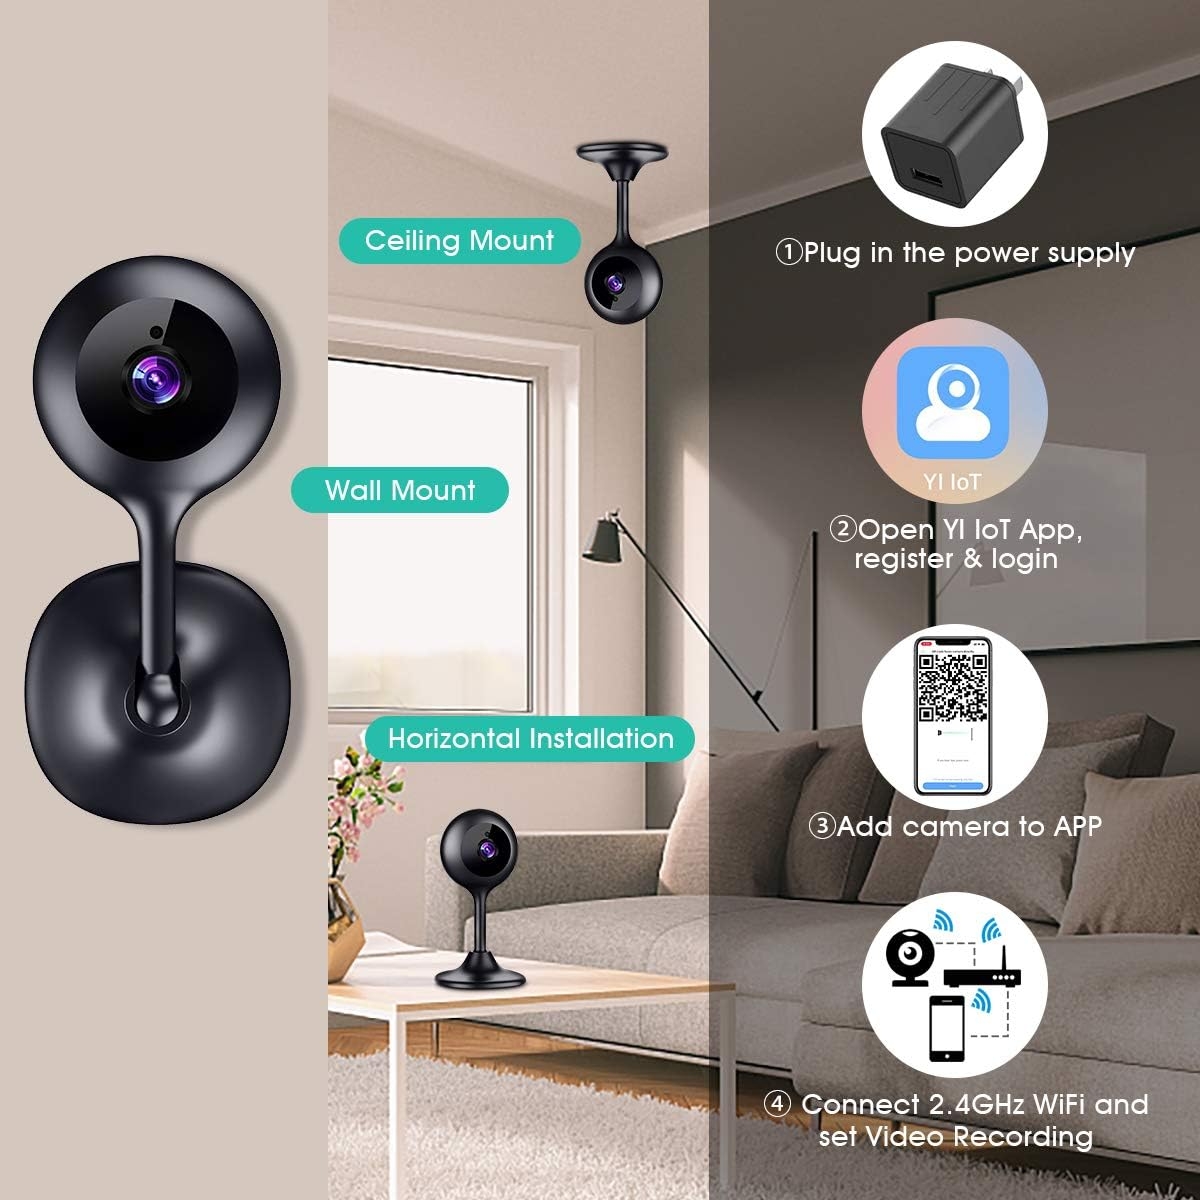 MECO WiFi IP Camera 1080P HD Home IP Security Nanny Camera with Night Vision, Sound & Motion Detection, Security Surveillance 2.4GHz Pet Baby Monitor - Cloud Service Available